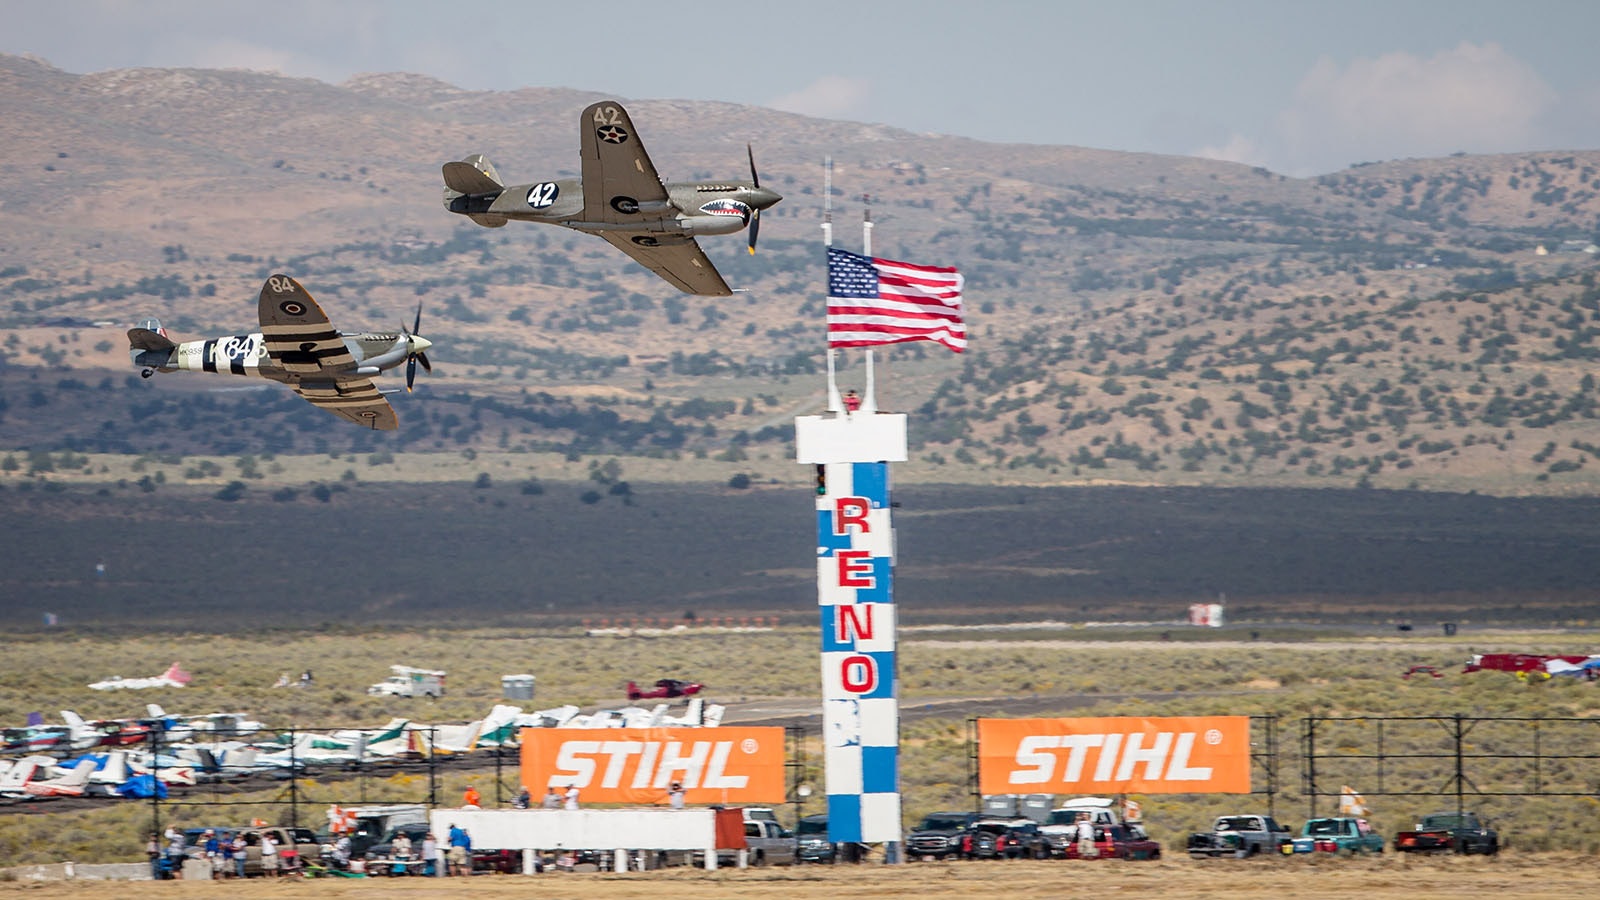 A scene from the 2017 National Championship Air Races in Reno, Nevada.